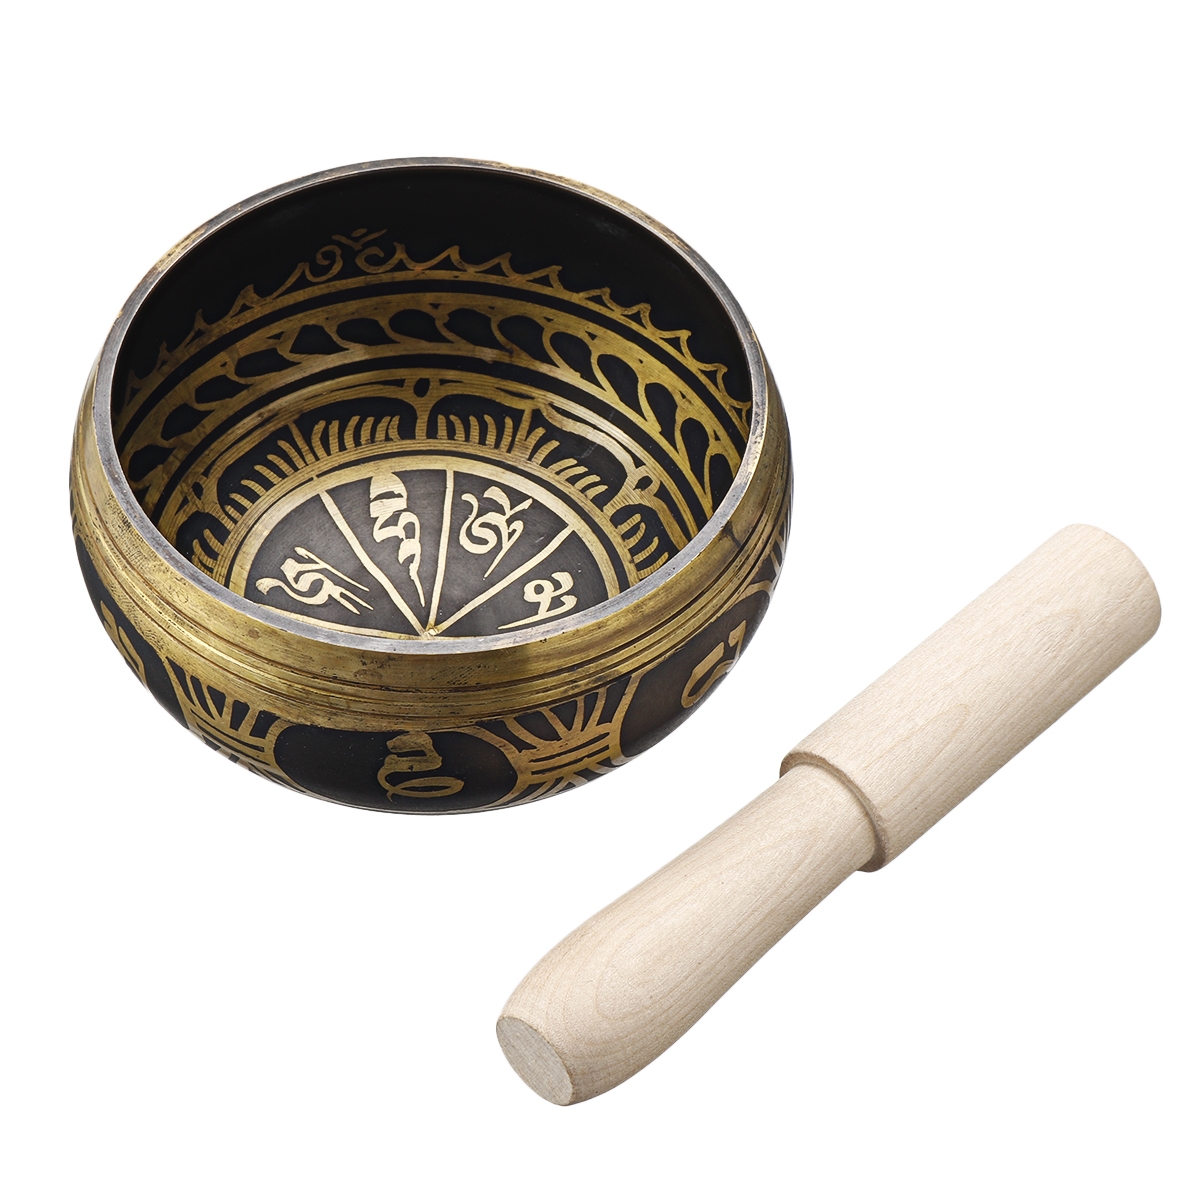 Antique Design Tibetan Singing Bowl Set With Stick, Promotes Peace, Chakra Healing, and Mindfulness,as Exquisite Gift